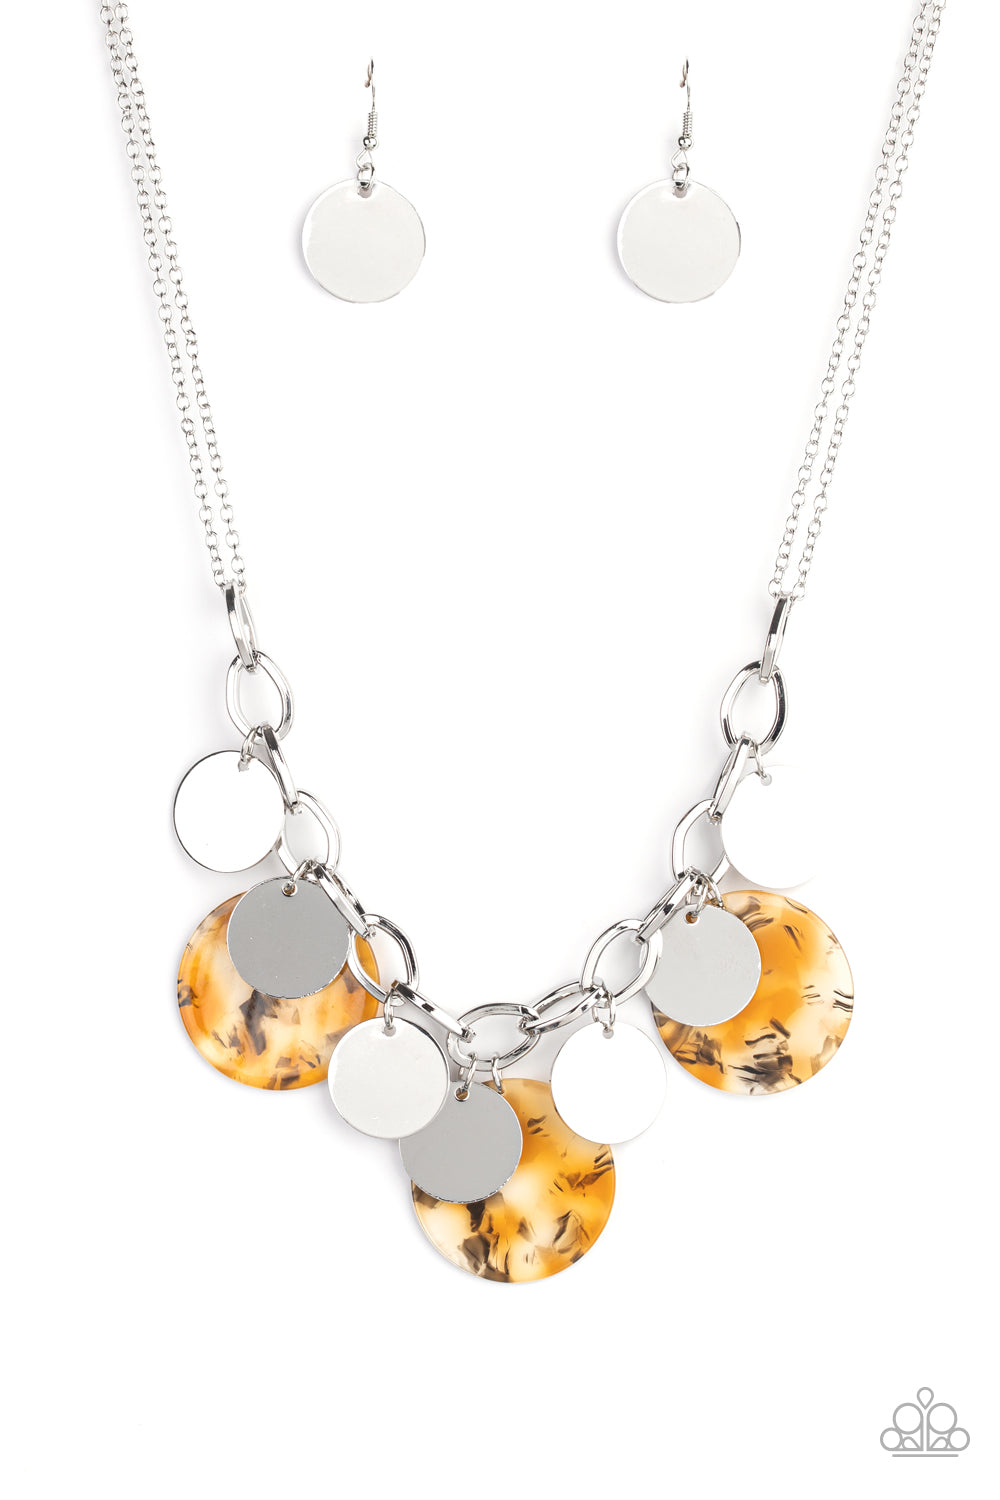 Confetti Confection - Yellow Necklace - Jazzy Jewels With Lady J